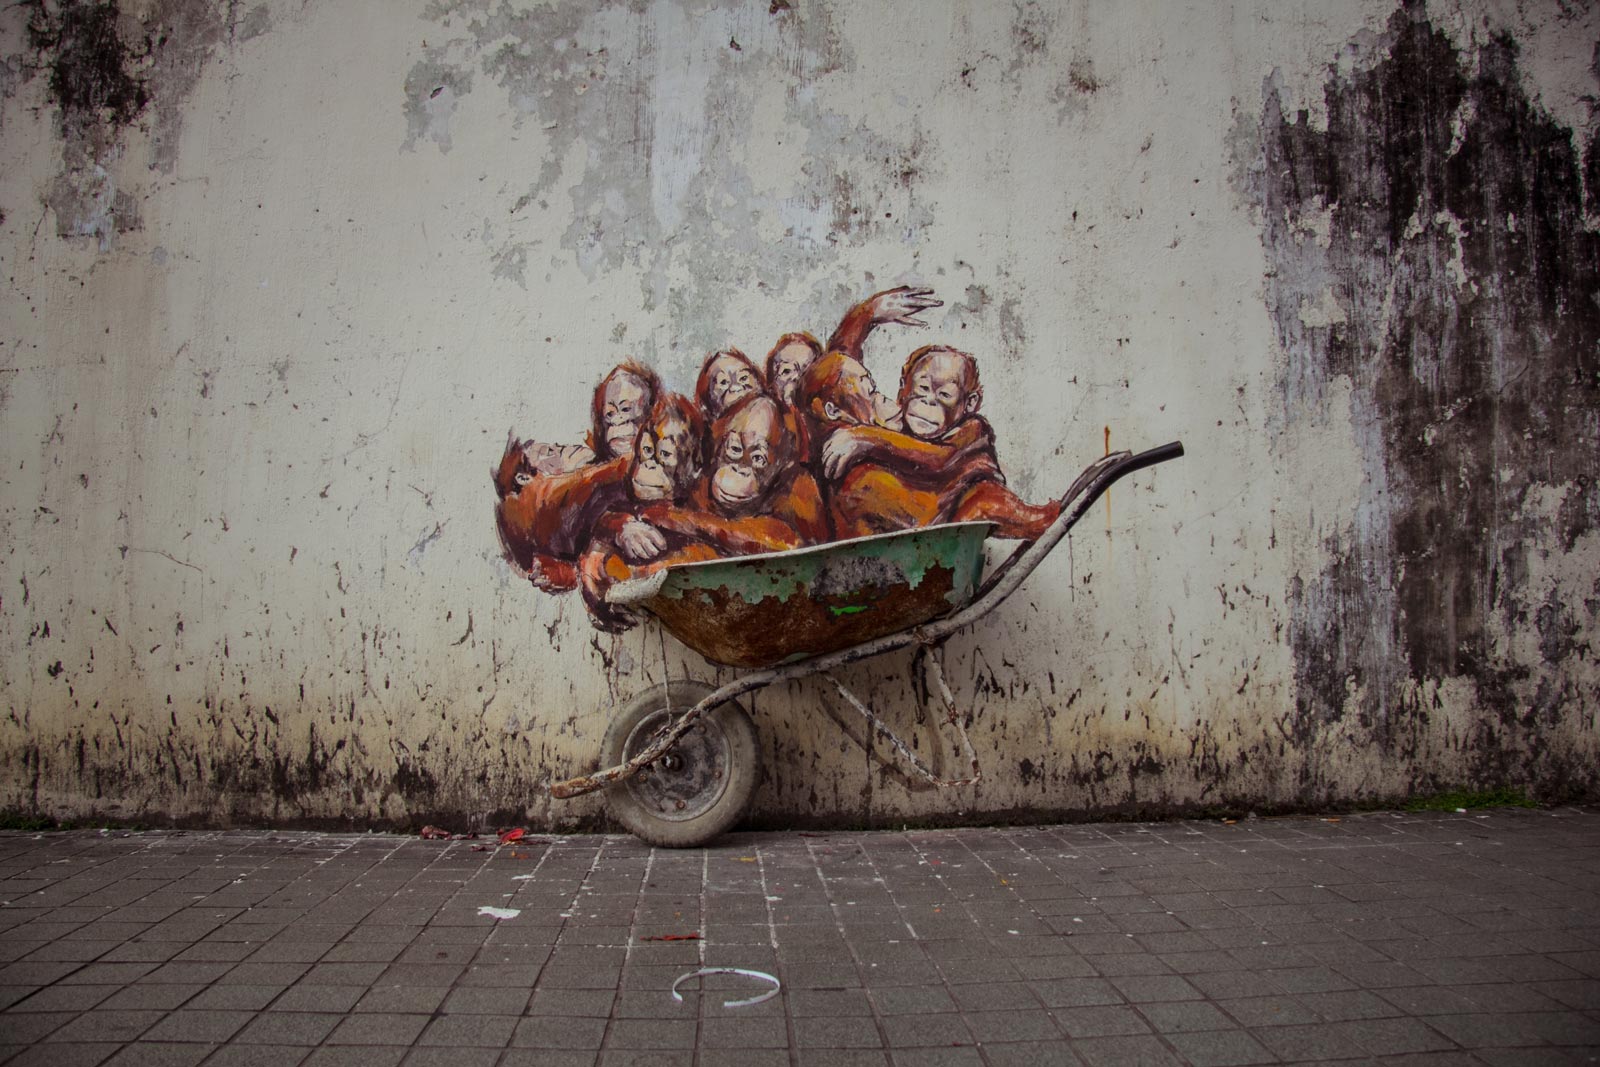 Ernest Zacharevic, A Curate's Egg